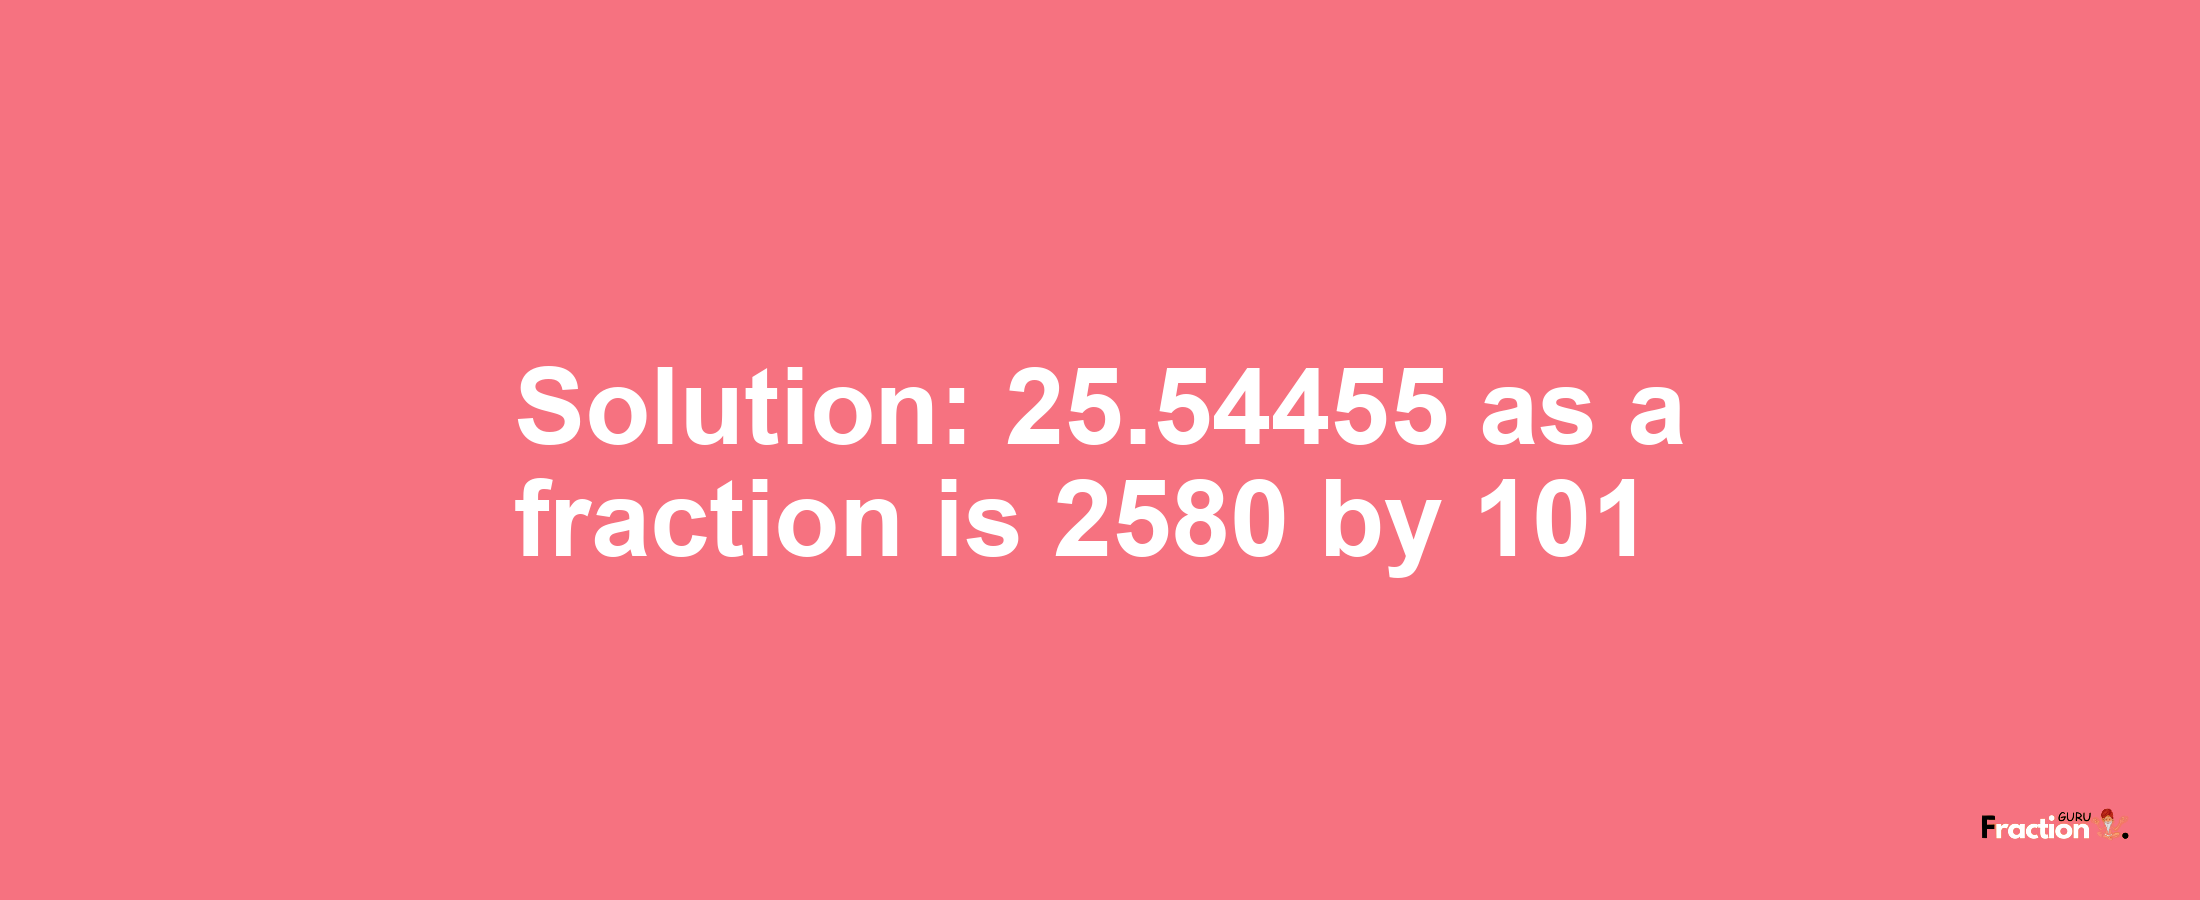 Solution:25.54455 as a fraction is 2580/101